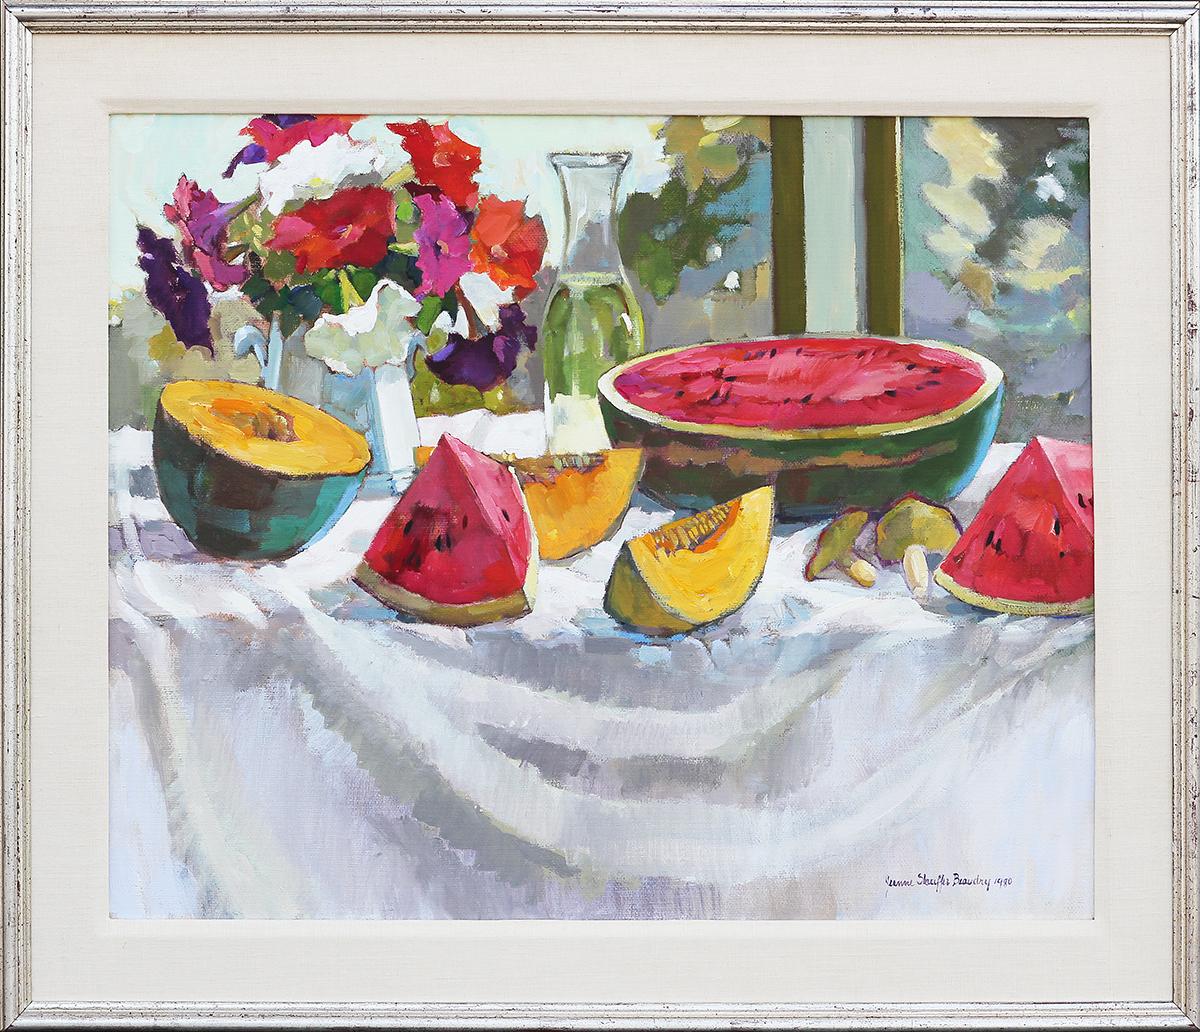 “Wedding Picnic” Colorful Abstract Impressionist Fruits and Flowers Still Life